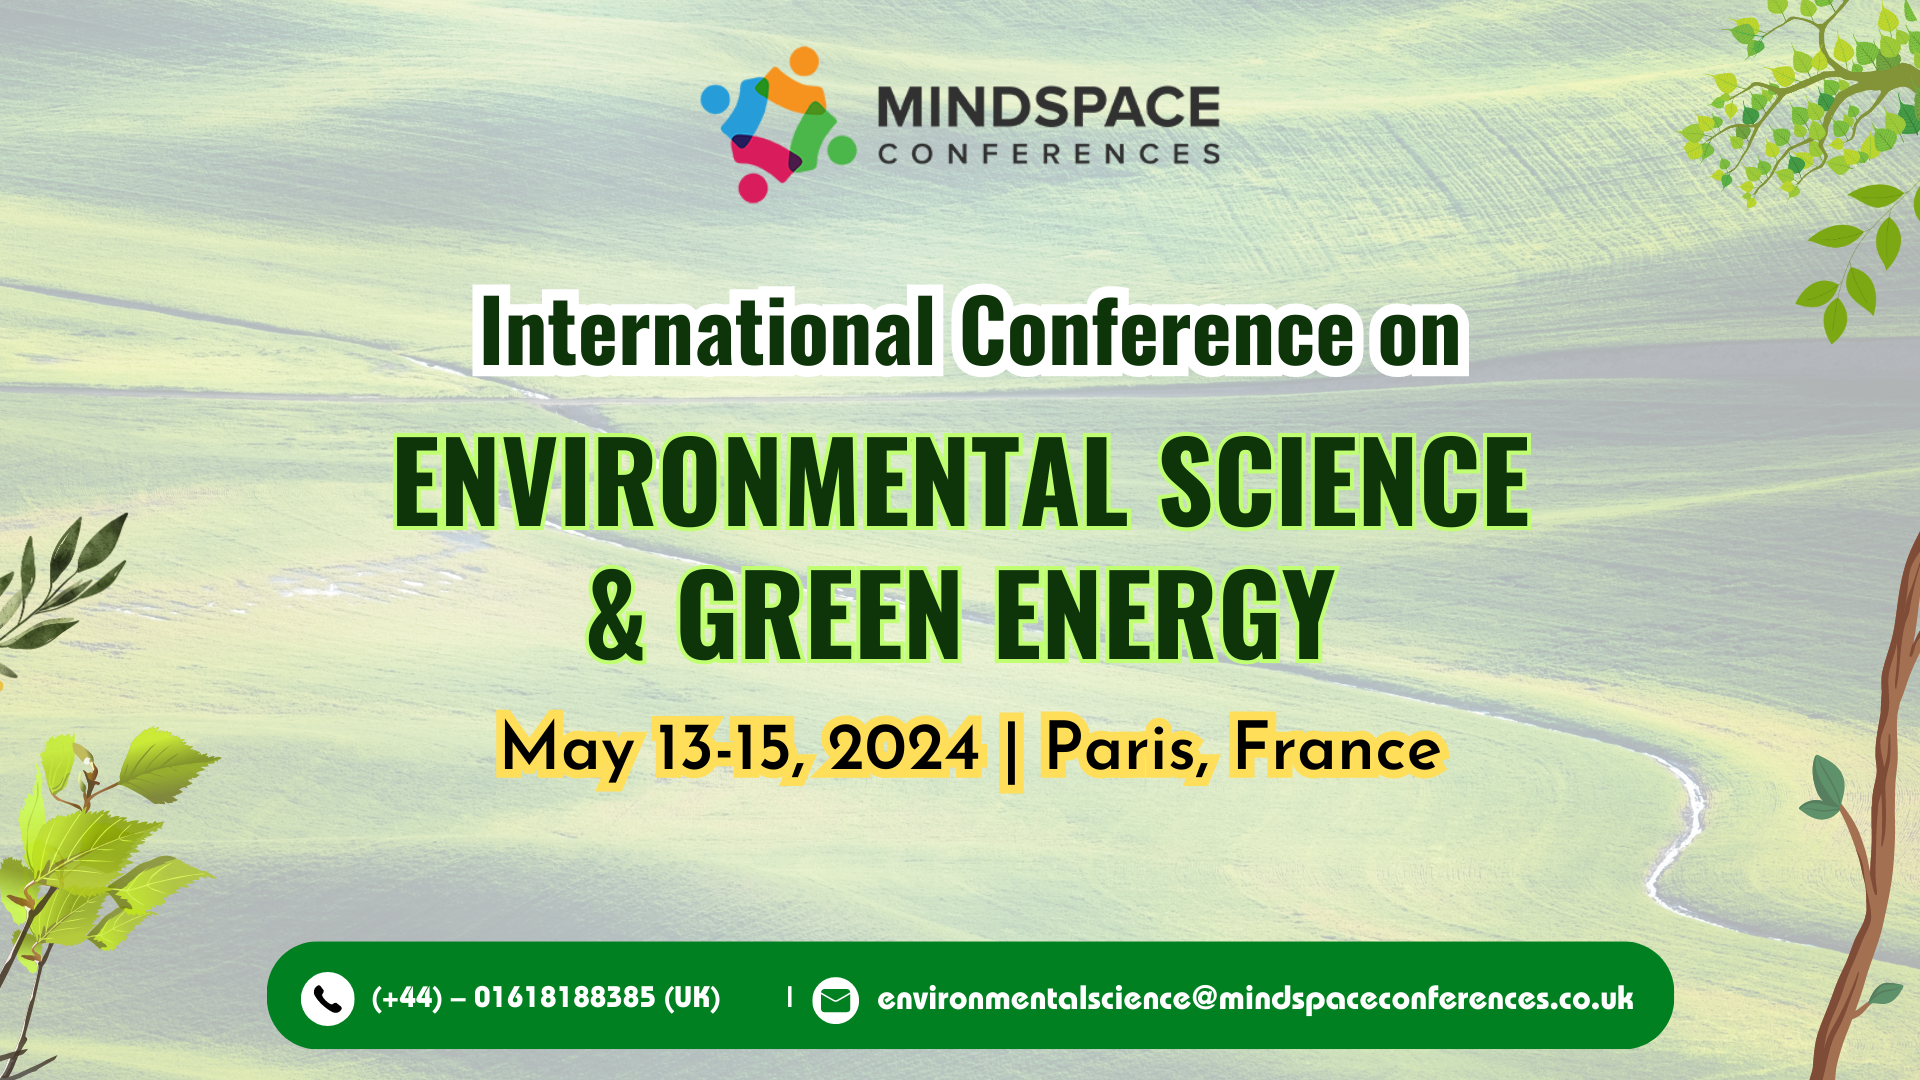 International Conference on ENVIRONMENTAL SCIENCE & GREEN ENERGY